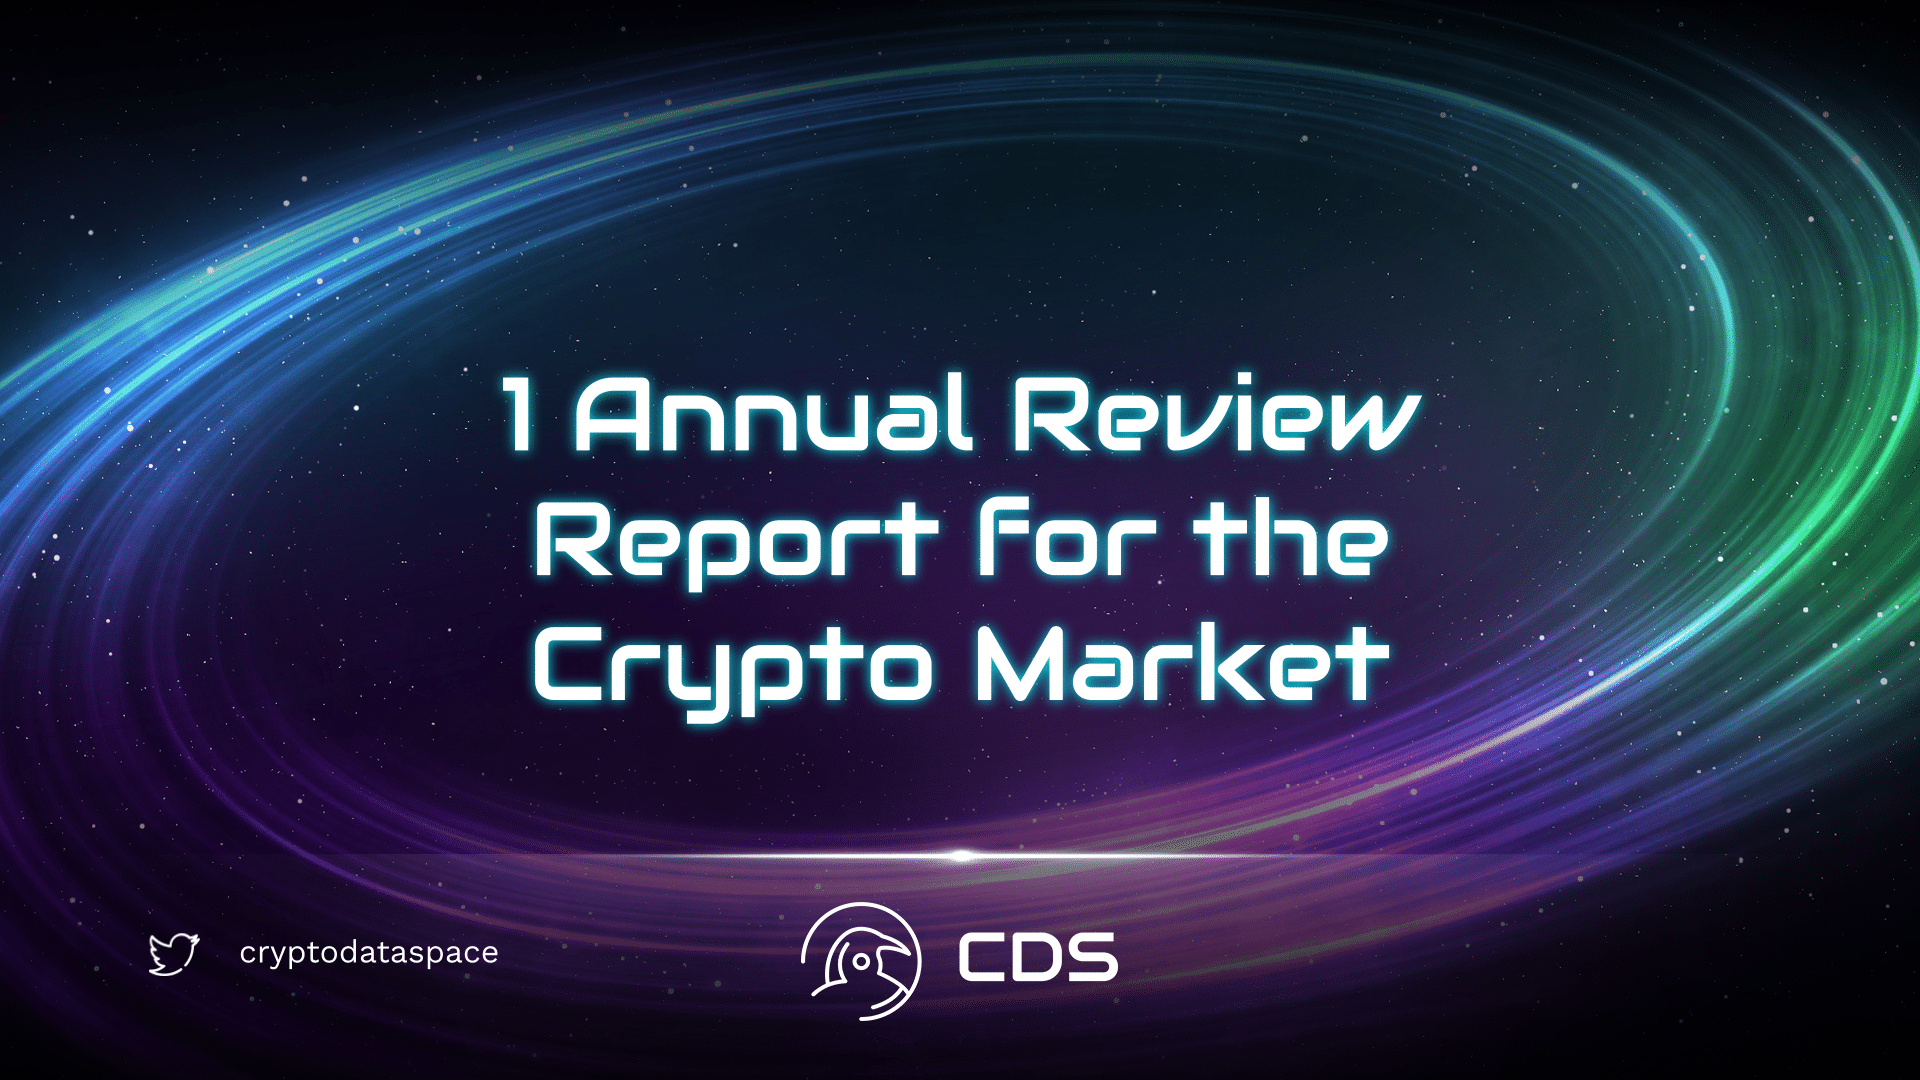 1 Annual Review Report for the Crypto Market